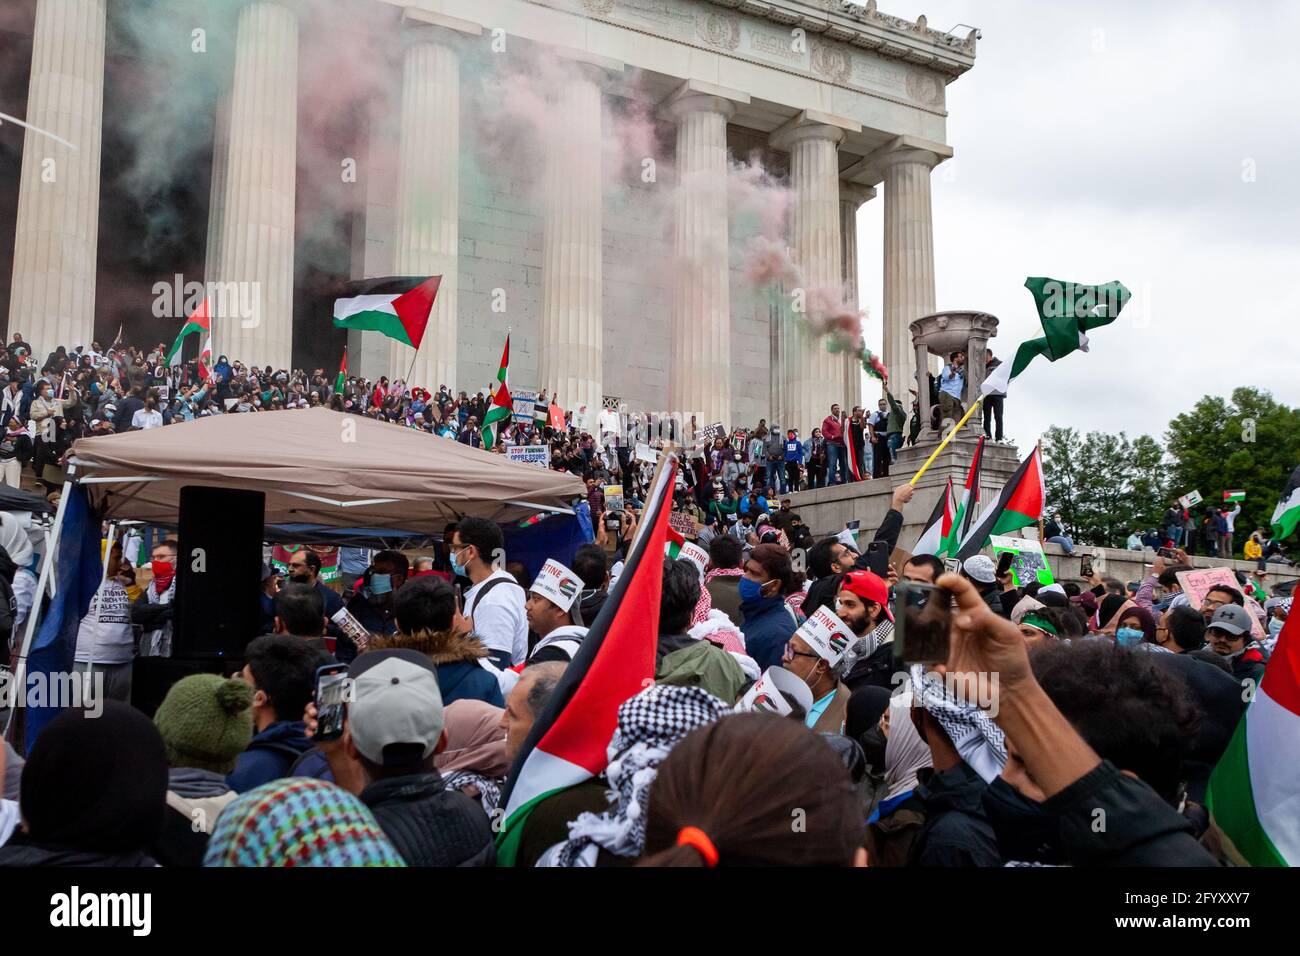 Washington, DC, USA, May 29, 2021.  Pictured: A man releases plumes of red and green smoke during the National March for Palestine at the Lincoln Memorial.  Thousands of people from the eastern half of the United States came to Washington to participate in the march.  American Muslims for Palestine and the US Council of Muslim Organizations co-hosted the event with 7 partnering organizations, and an additional 109 organizations endoresed the march.  Credit: Allison Bailey / Alamy Live News Stock Photo